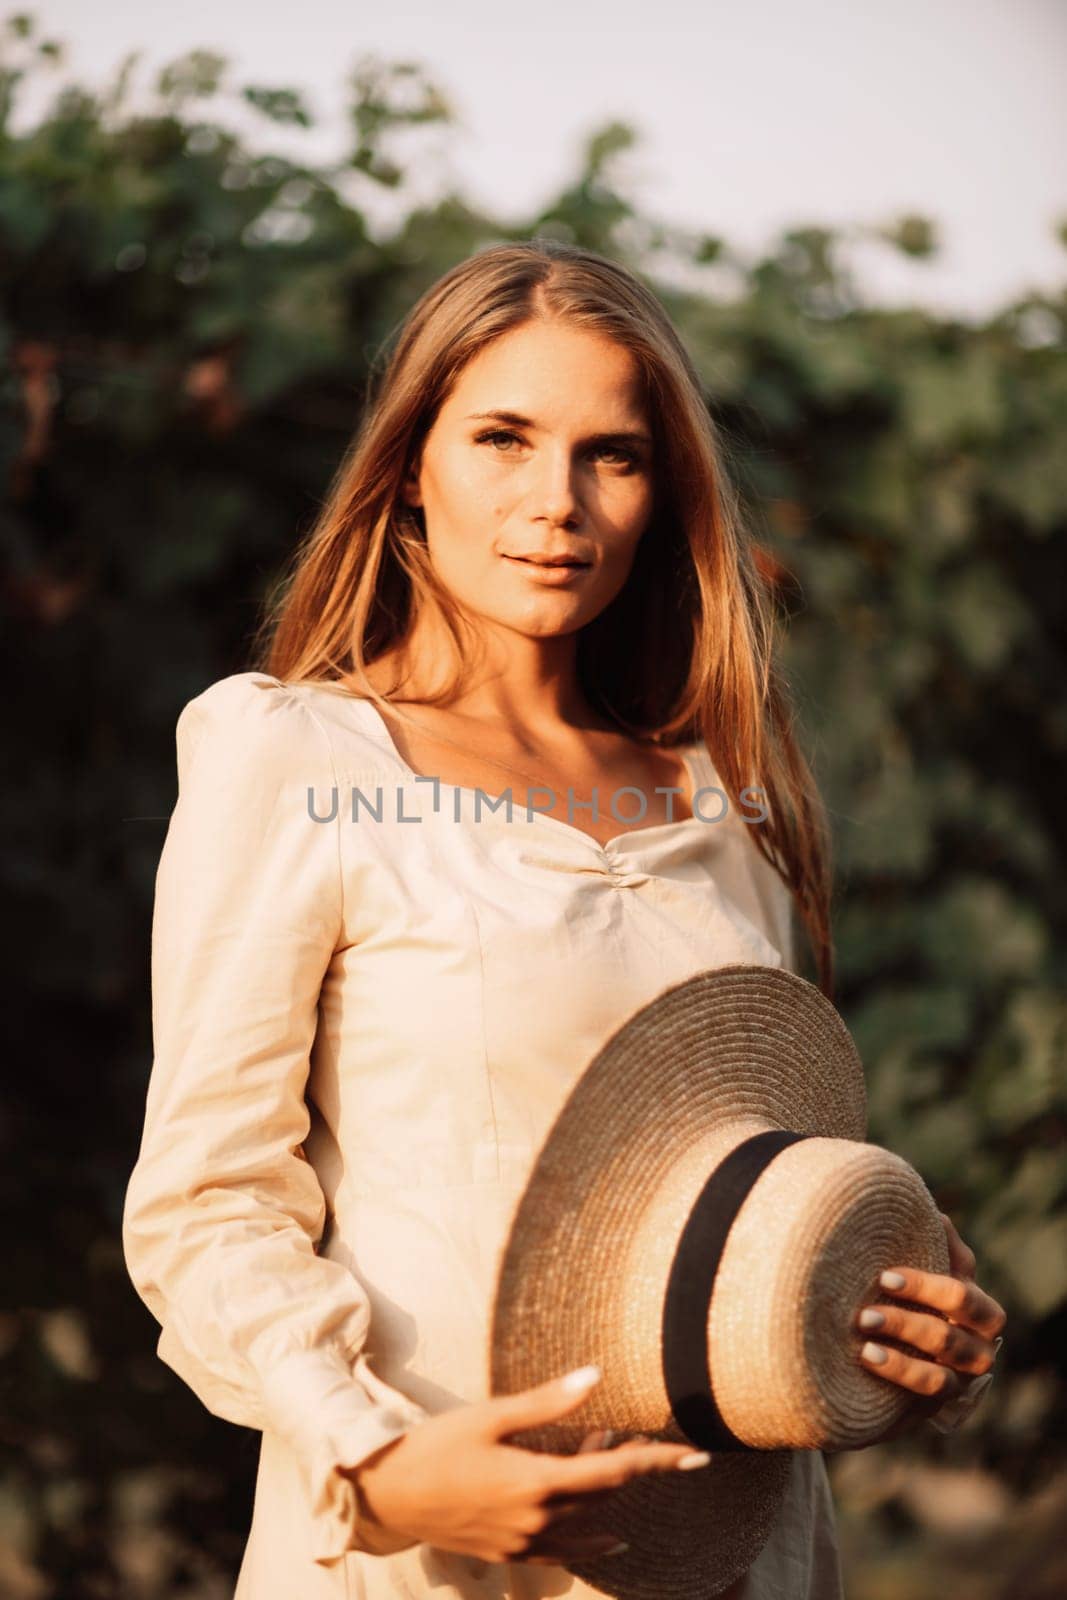 Woman with straw hat stands in front of vineyard. She is wearing a light dress and posing for a photo. Travel concept to different countries by Matiunina